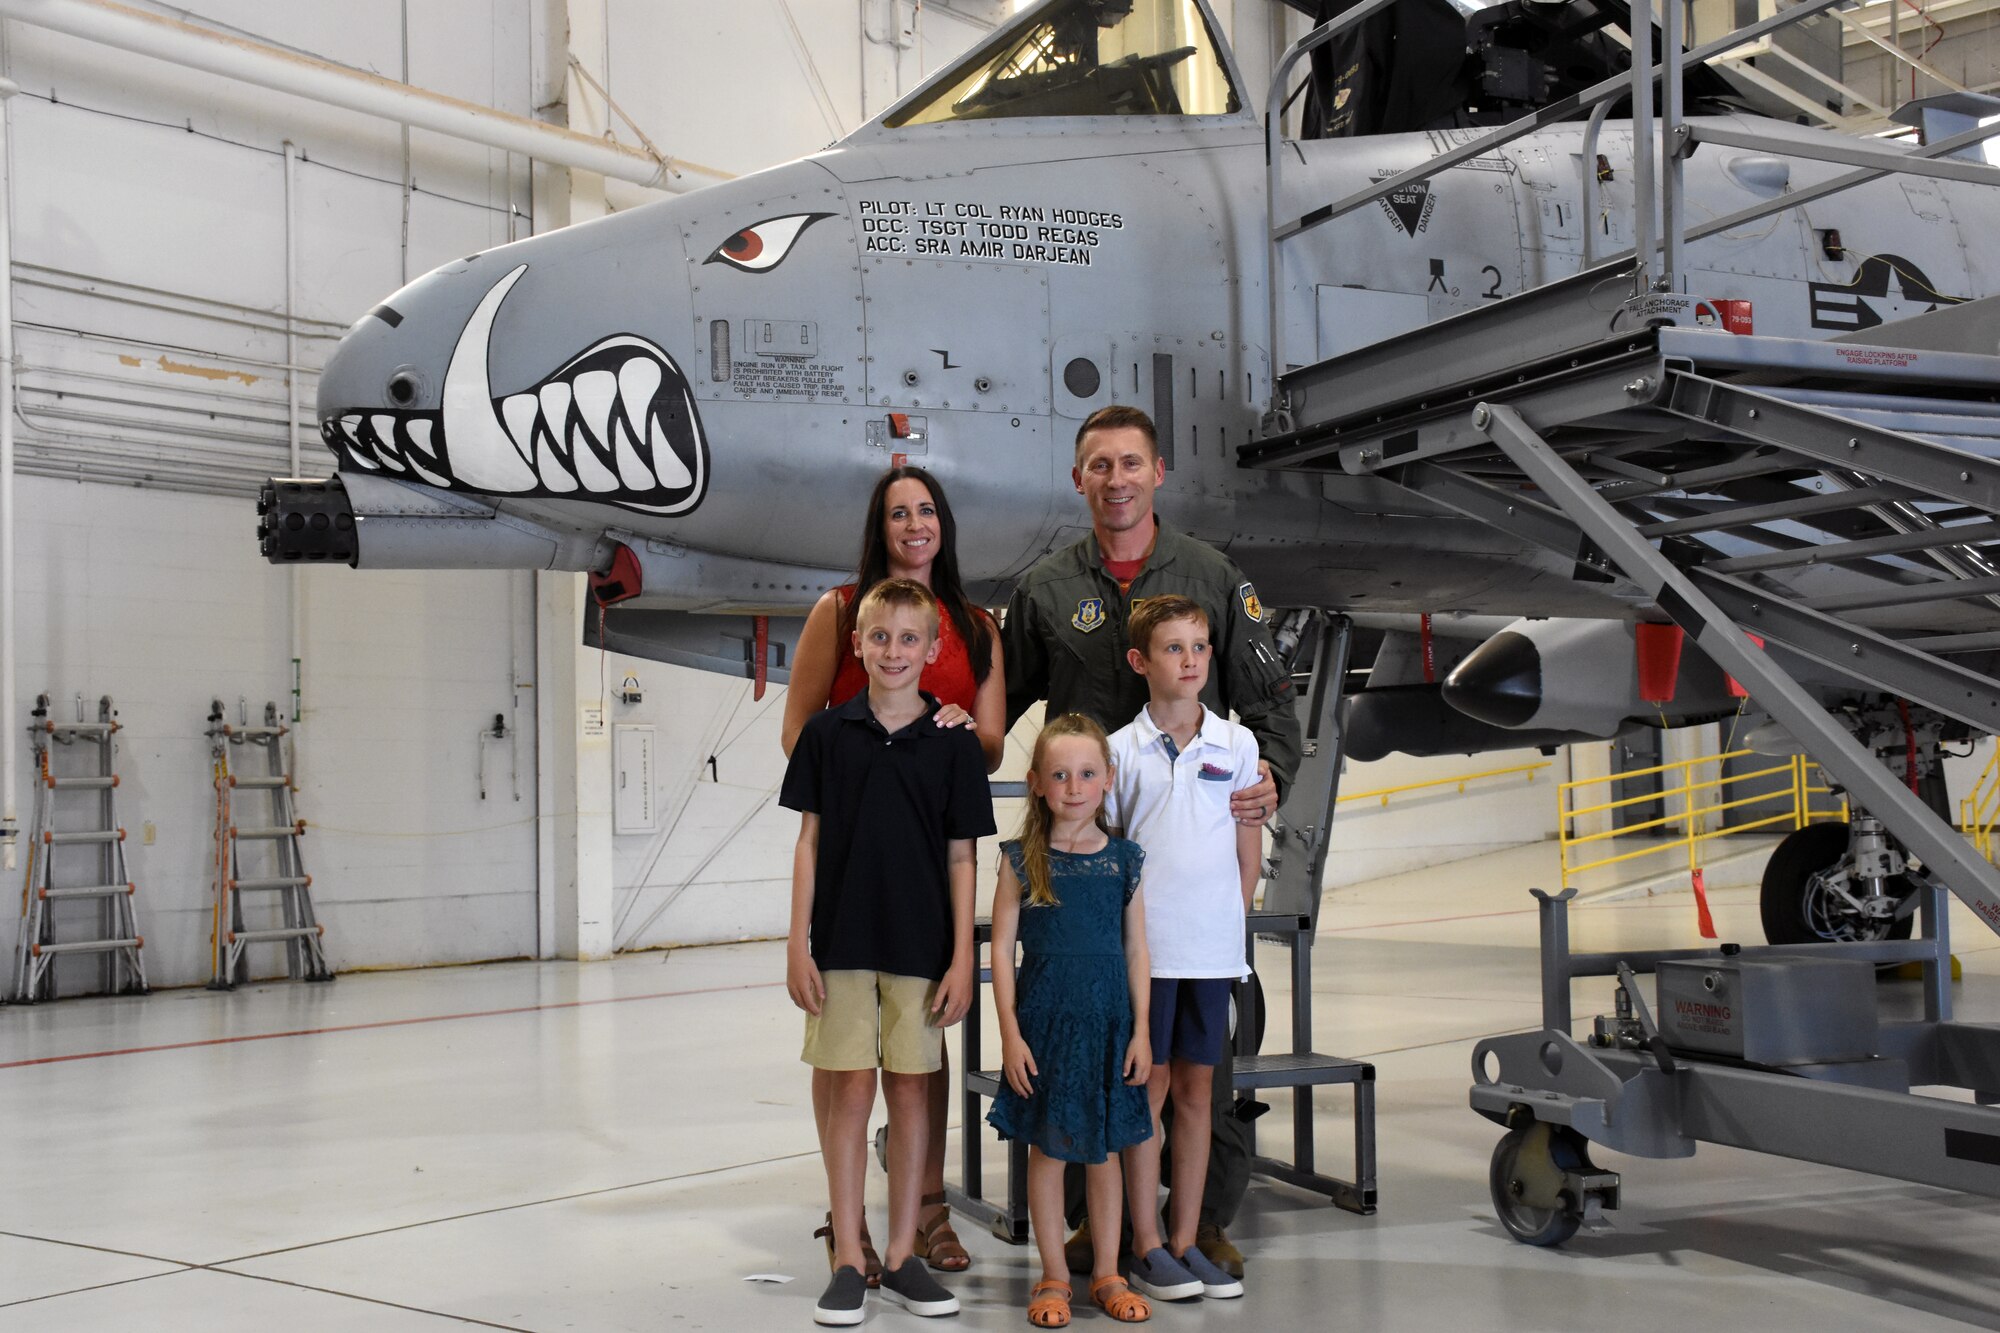 U.S. Air Force Lt. Col. Ryan Hodges stands with his family in front of his A-10C Thunderbolt II after taking command of the 303rd Fighter Squadron on Aug. 7, 2021, at Whiteman Air Force Base, Mo. (U.S. Air Force photo by Senior Airman Alex Chase)